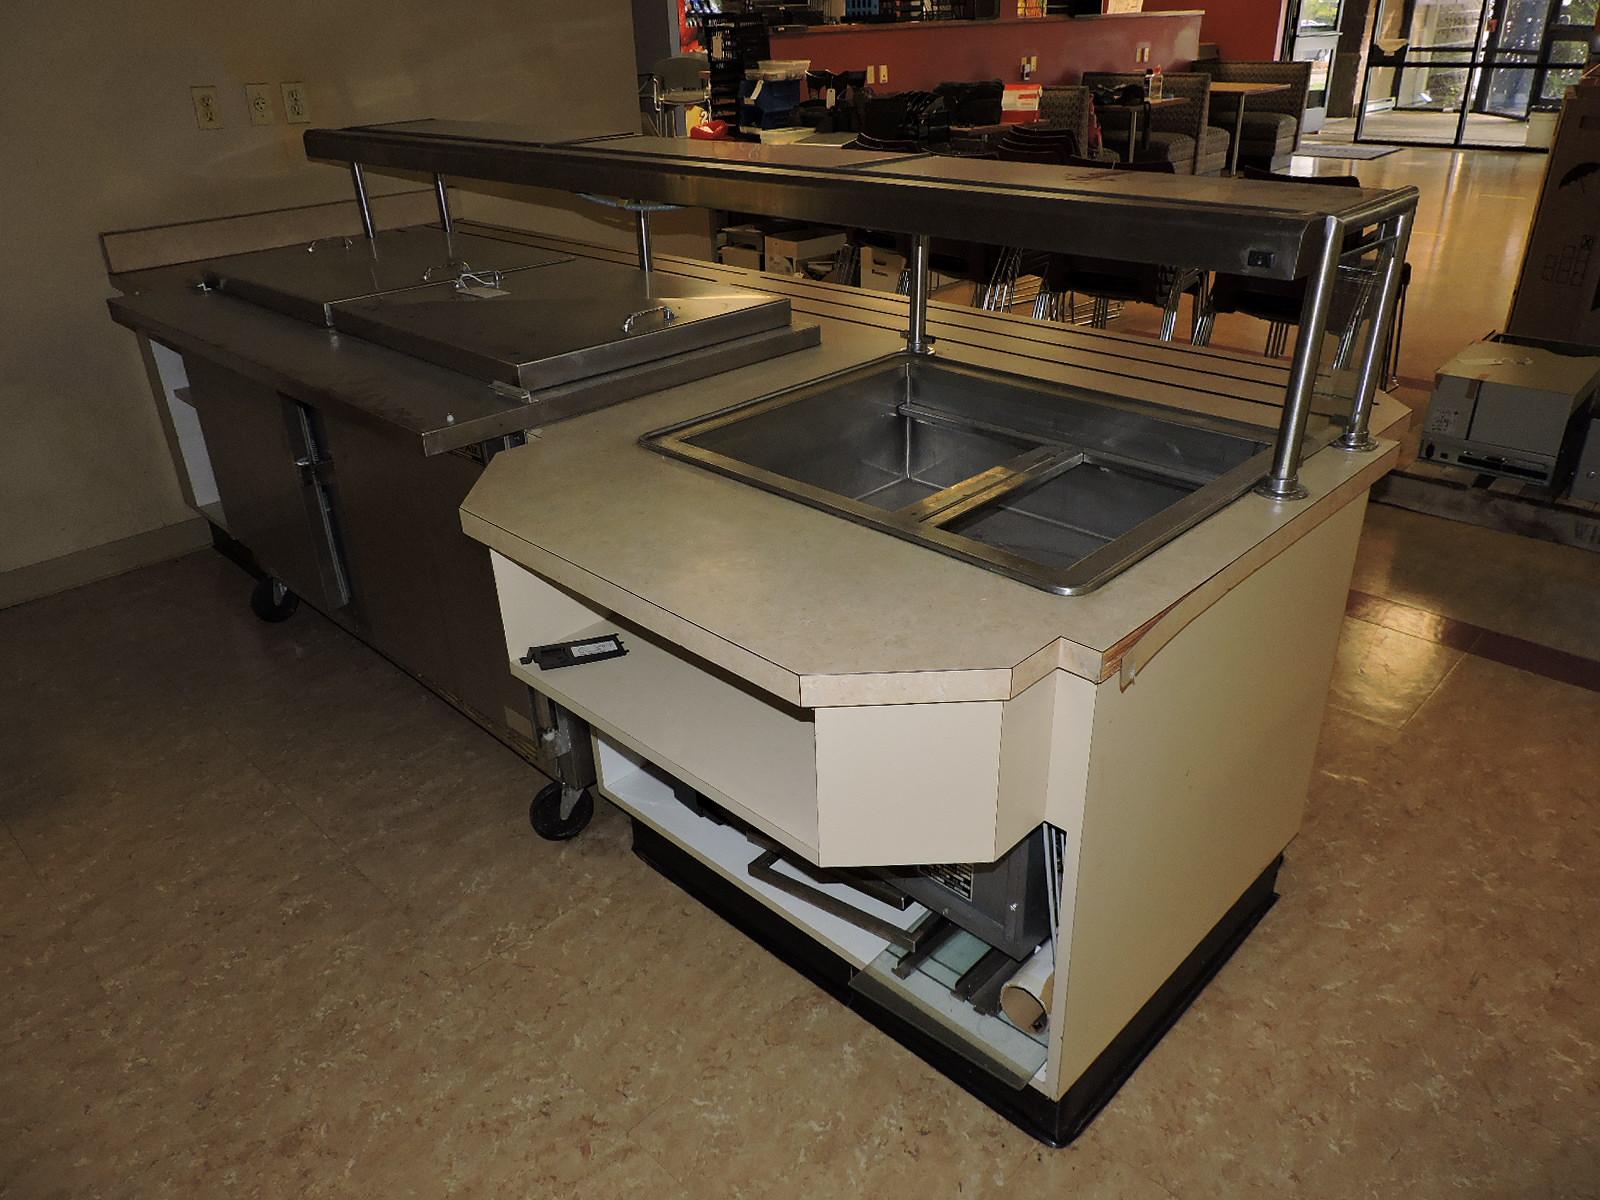 STEAM TABLE STATION with Beverage-Air OPEN-TOP COOLER